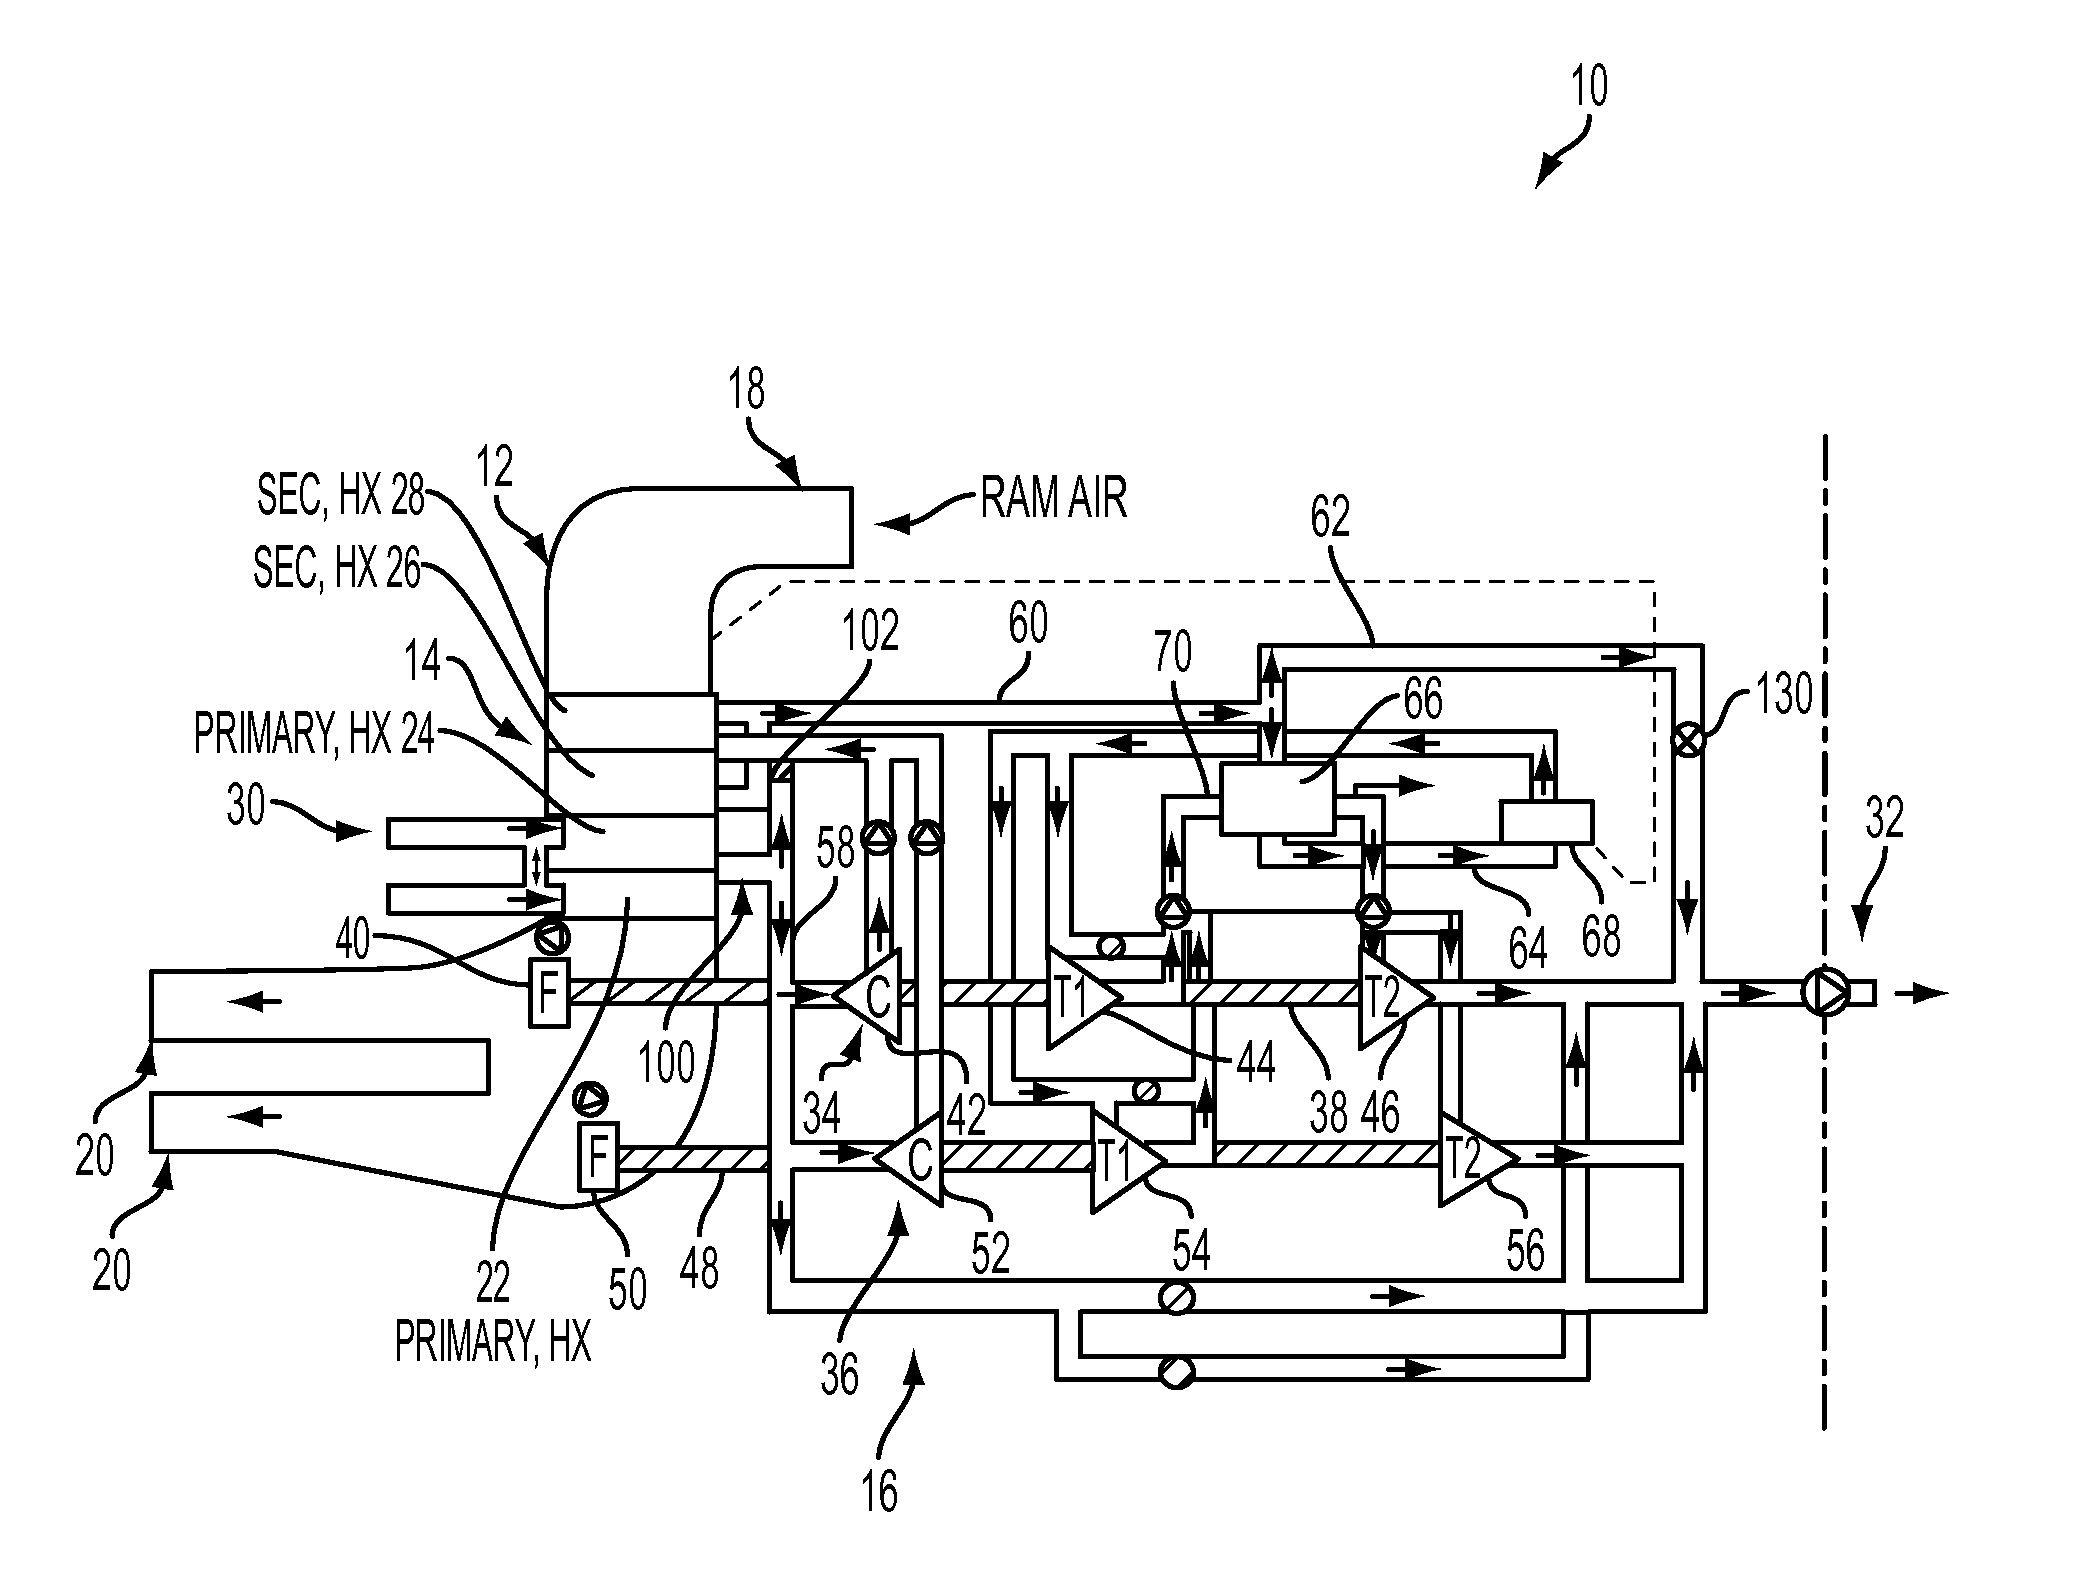 Multi-port compressor manifold with integral bypass valve